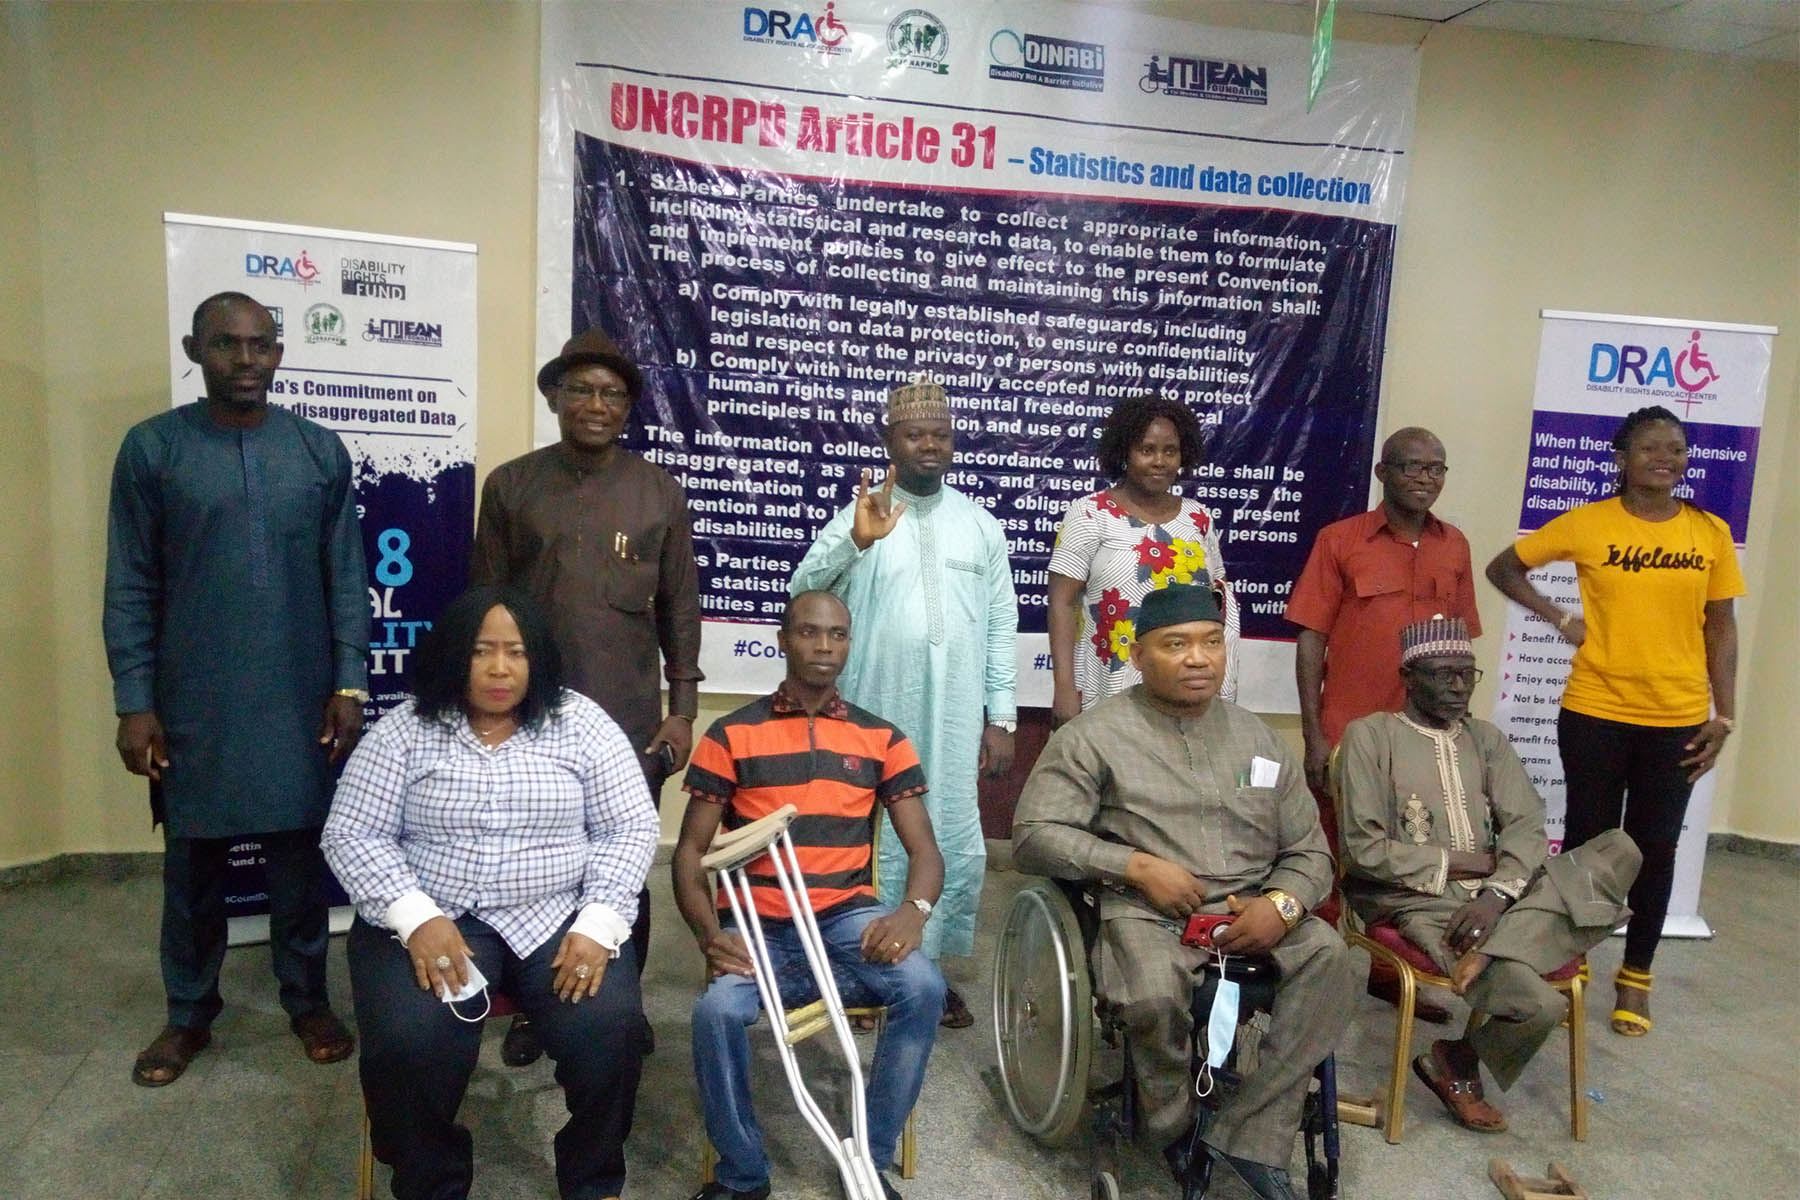 DINABI, DRAC & Two Others Calls for Disability Data Collection